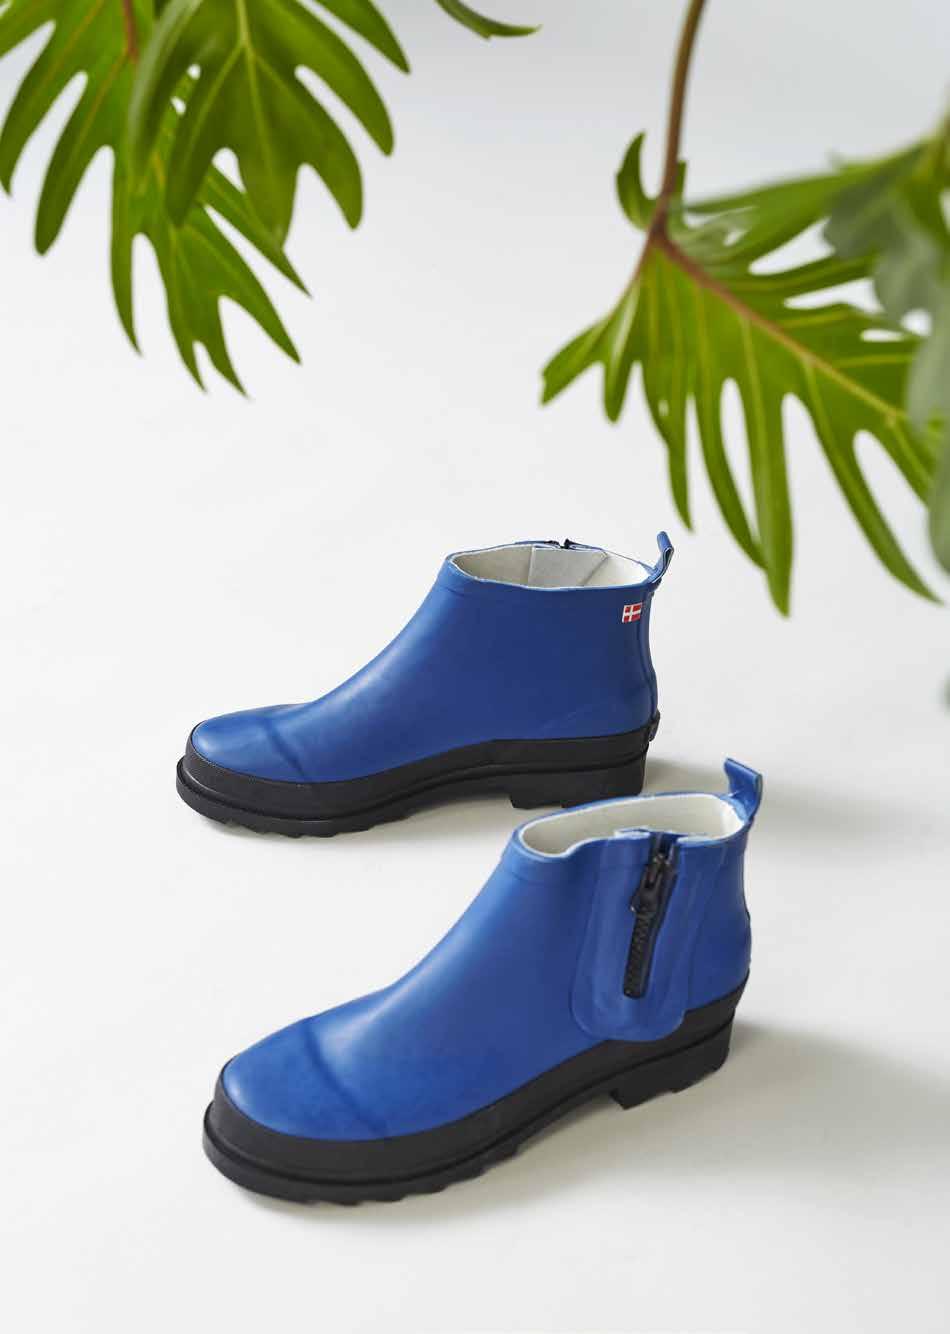 Danish design, classical Scandinavian look and feel in our range of wooden clogs and rubber boots.